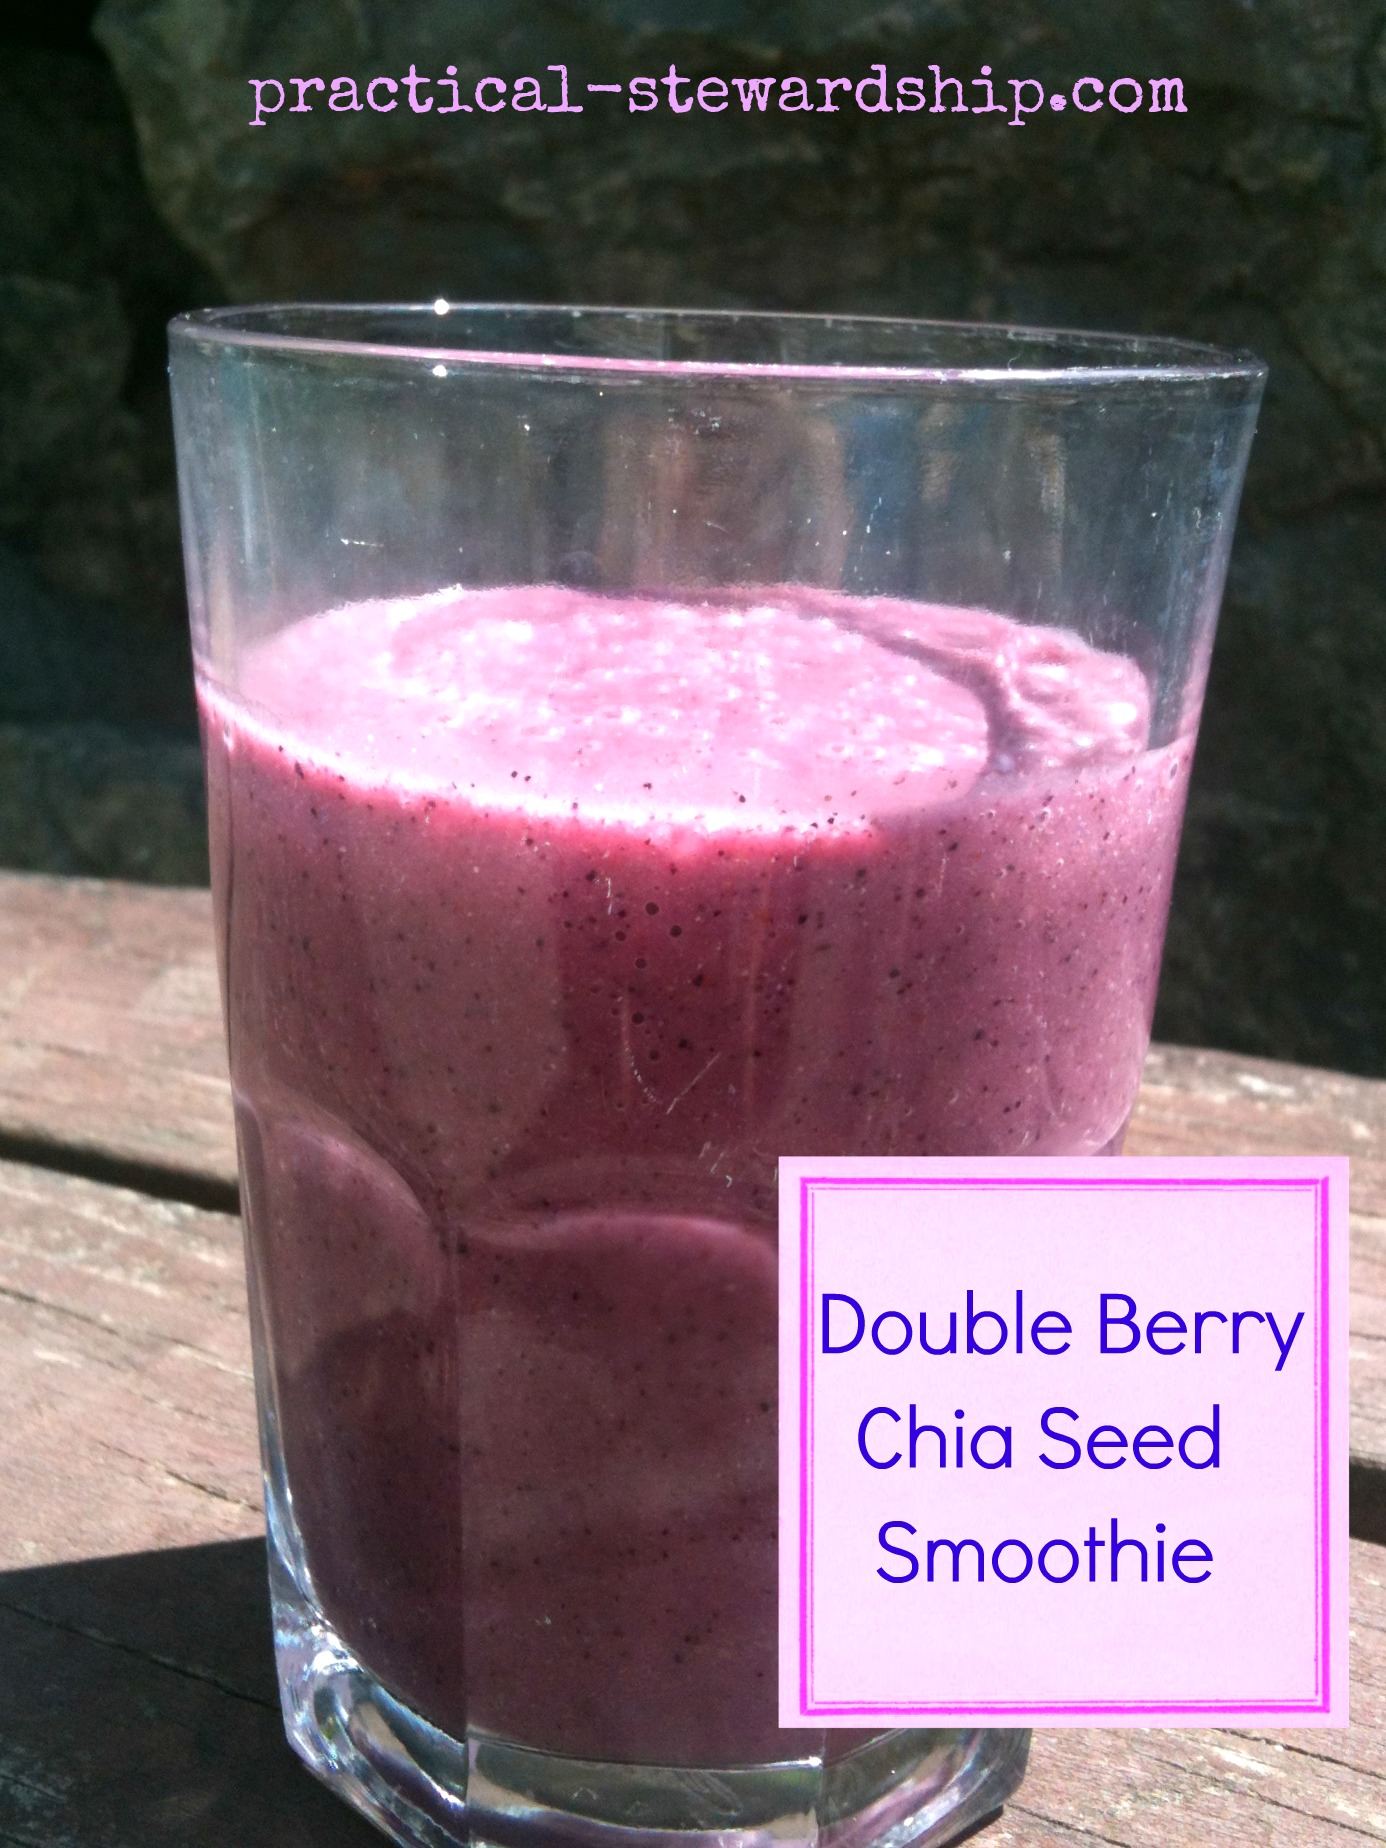 Double Berry Chia Seed Smoothie